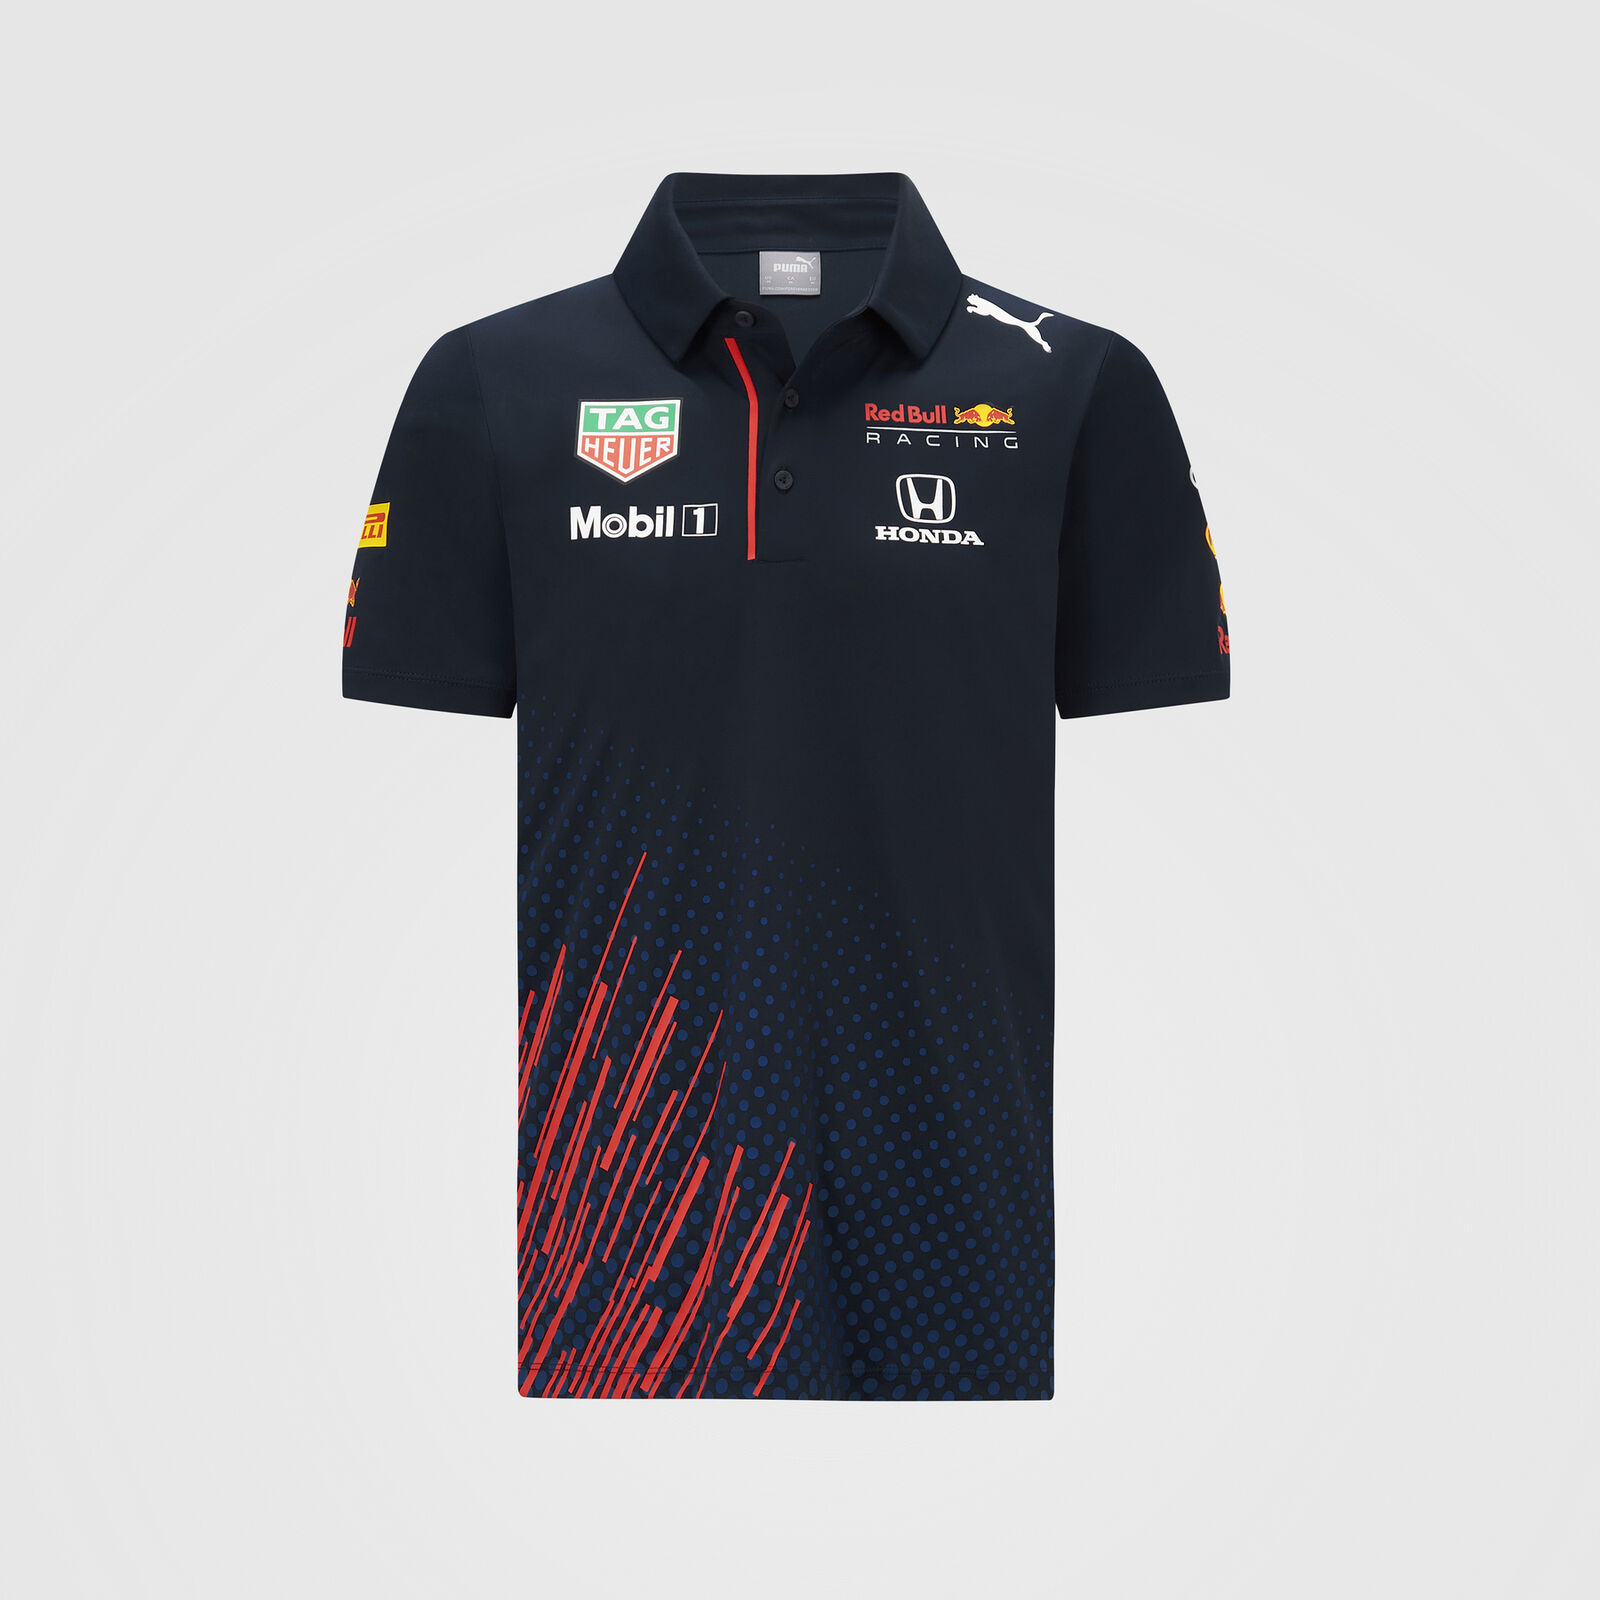 2021 Team Polo - Red Bull Racing | Fuel For Fans